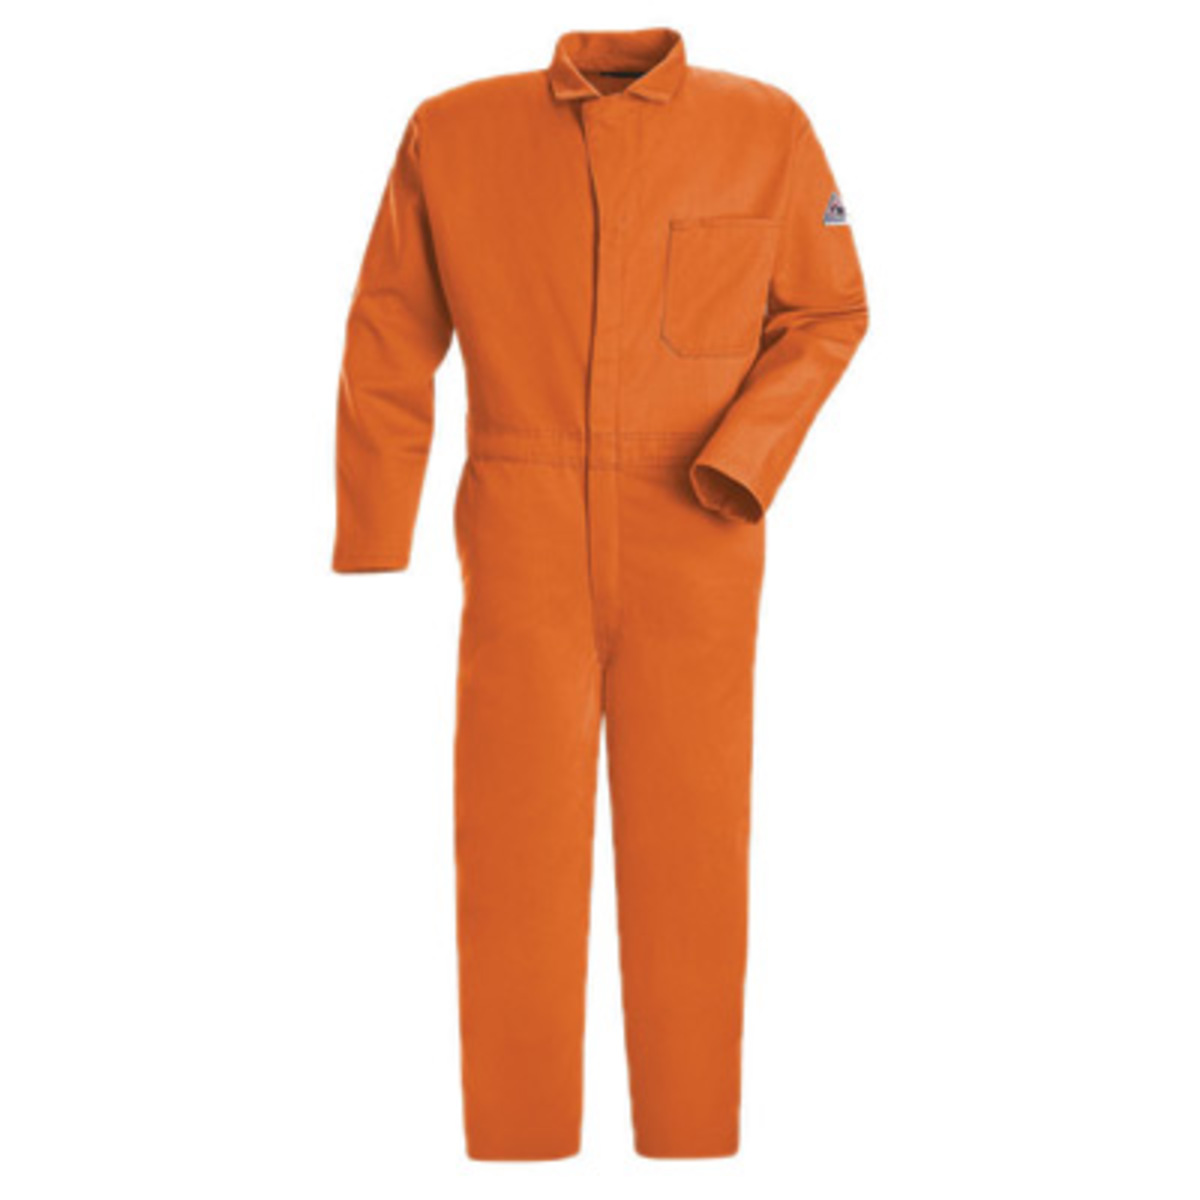 Bulwark® 68 Regular Orange EXCEL FR® Twill Cotton Flame Resistant Coveralls With Zipper Front Closure